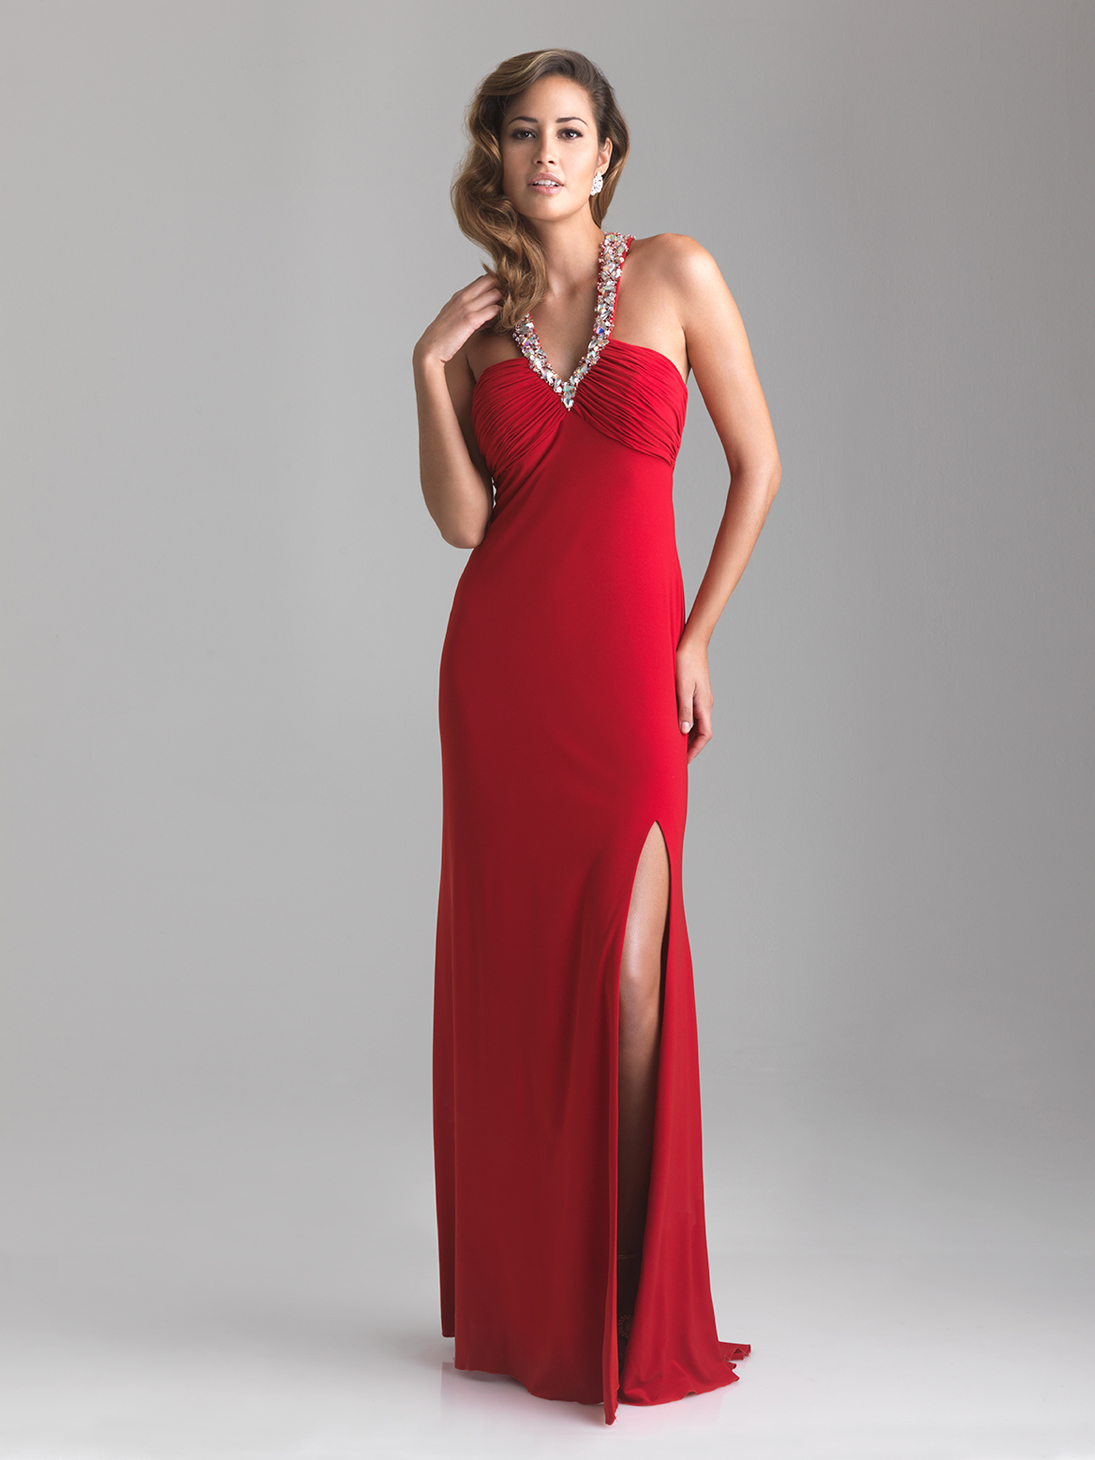 Sexy Red Bridesmaid Dresses : The Trend Of The Year